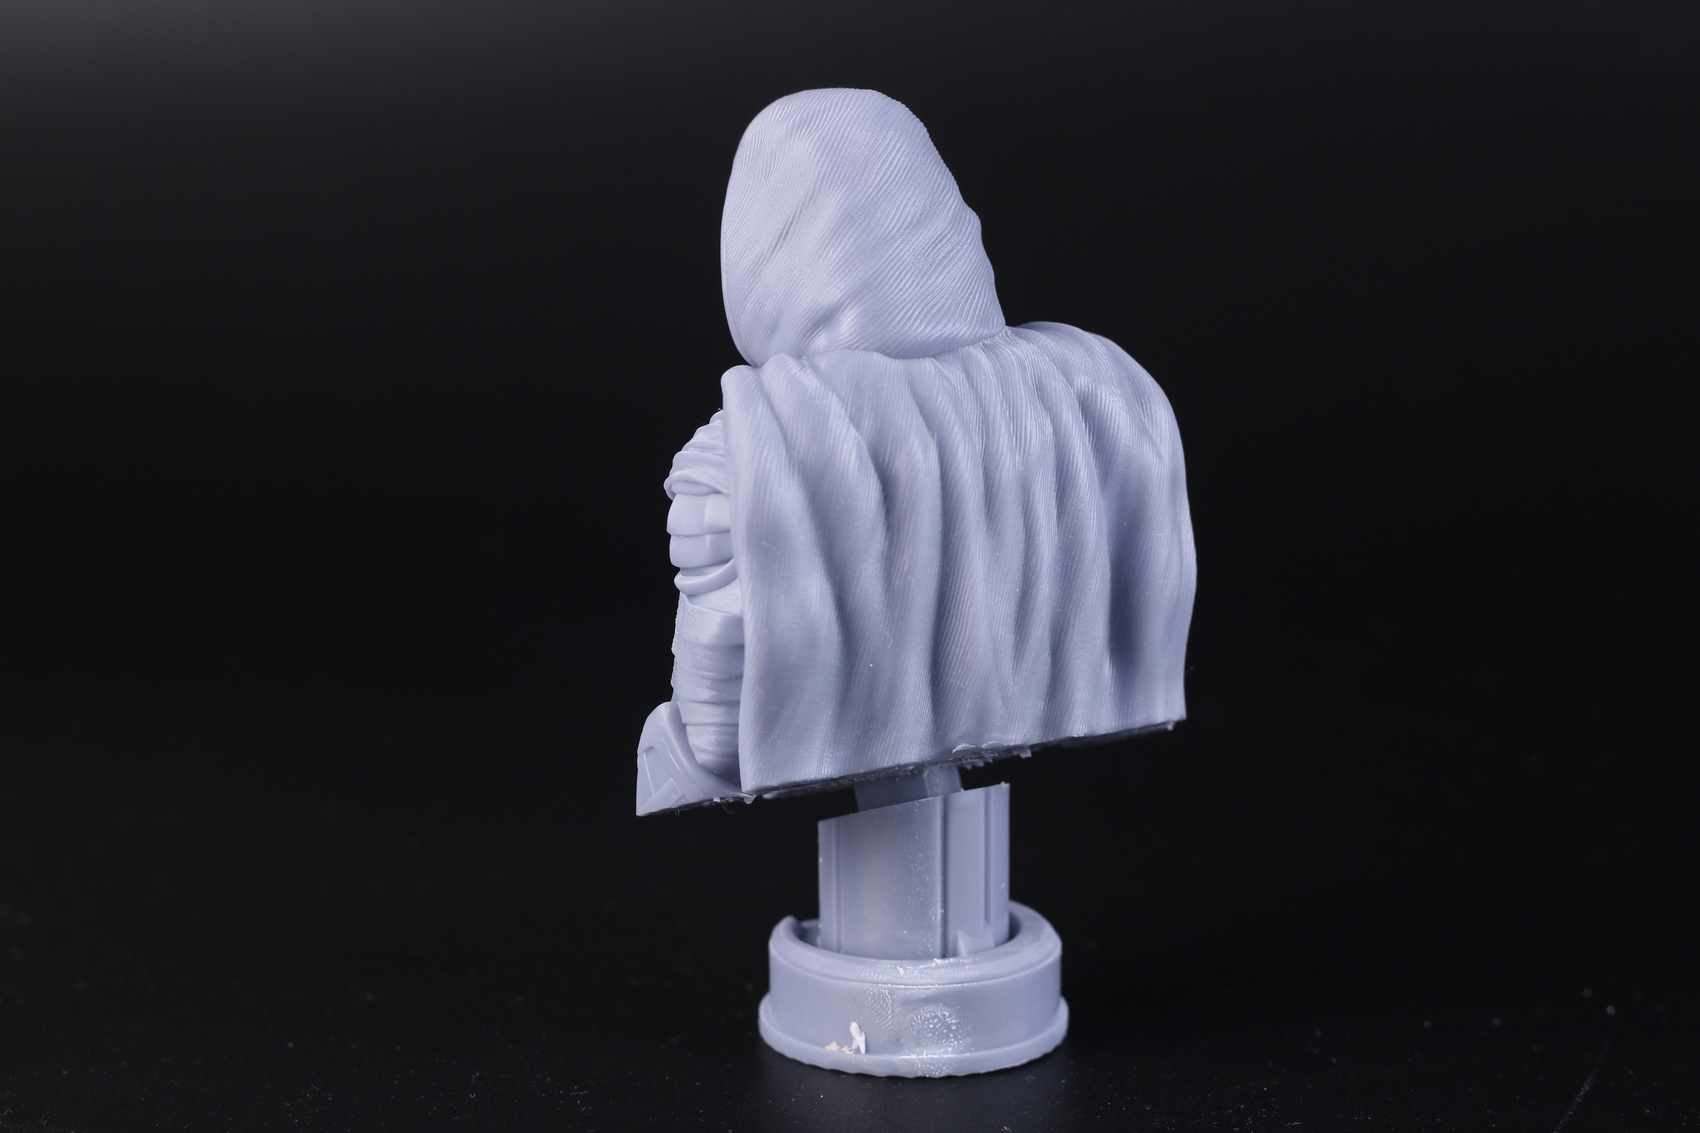 Moon Knight Bust Anycubic Photon M3 Review4 | Anycubic Photon M3 Review: Bridging the gap